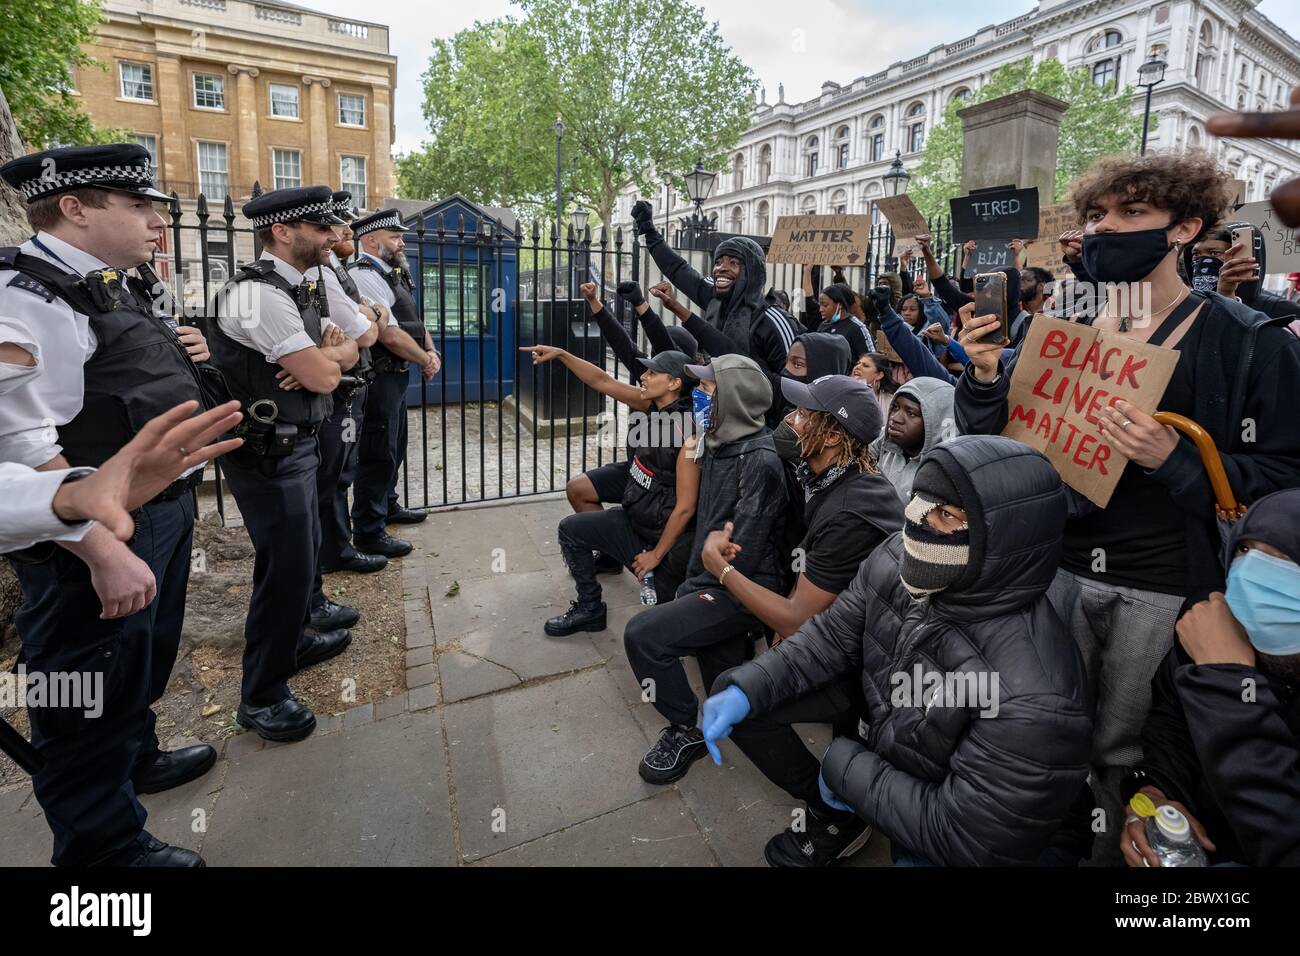 Black Lives Matter (BLM) activists and supporters confront police in Westminster angrily demanding all officers take a knee in show of solidarity support for the Black Lives Matter movement following the death of George Floyd, a black man, who died in police custody on 25th May in Minneapolis. London, UK. Stock Photo